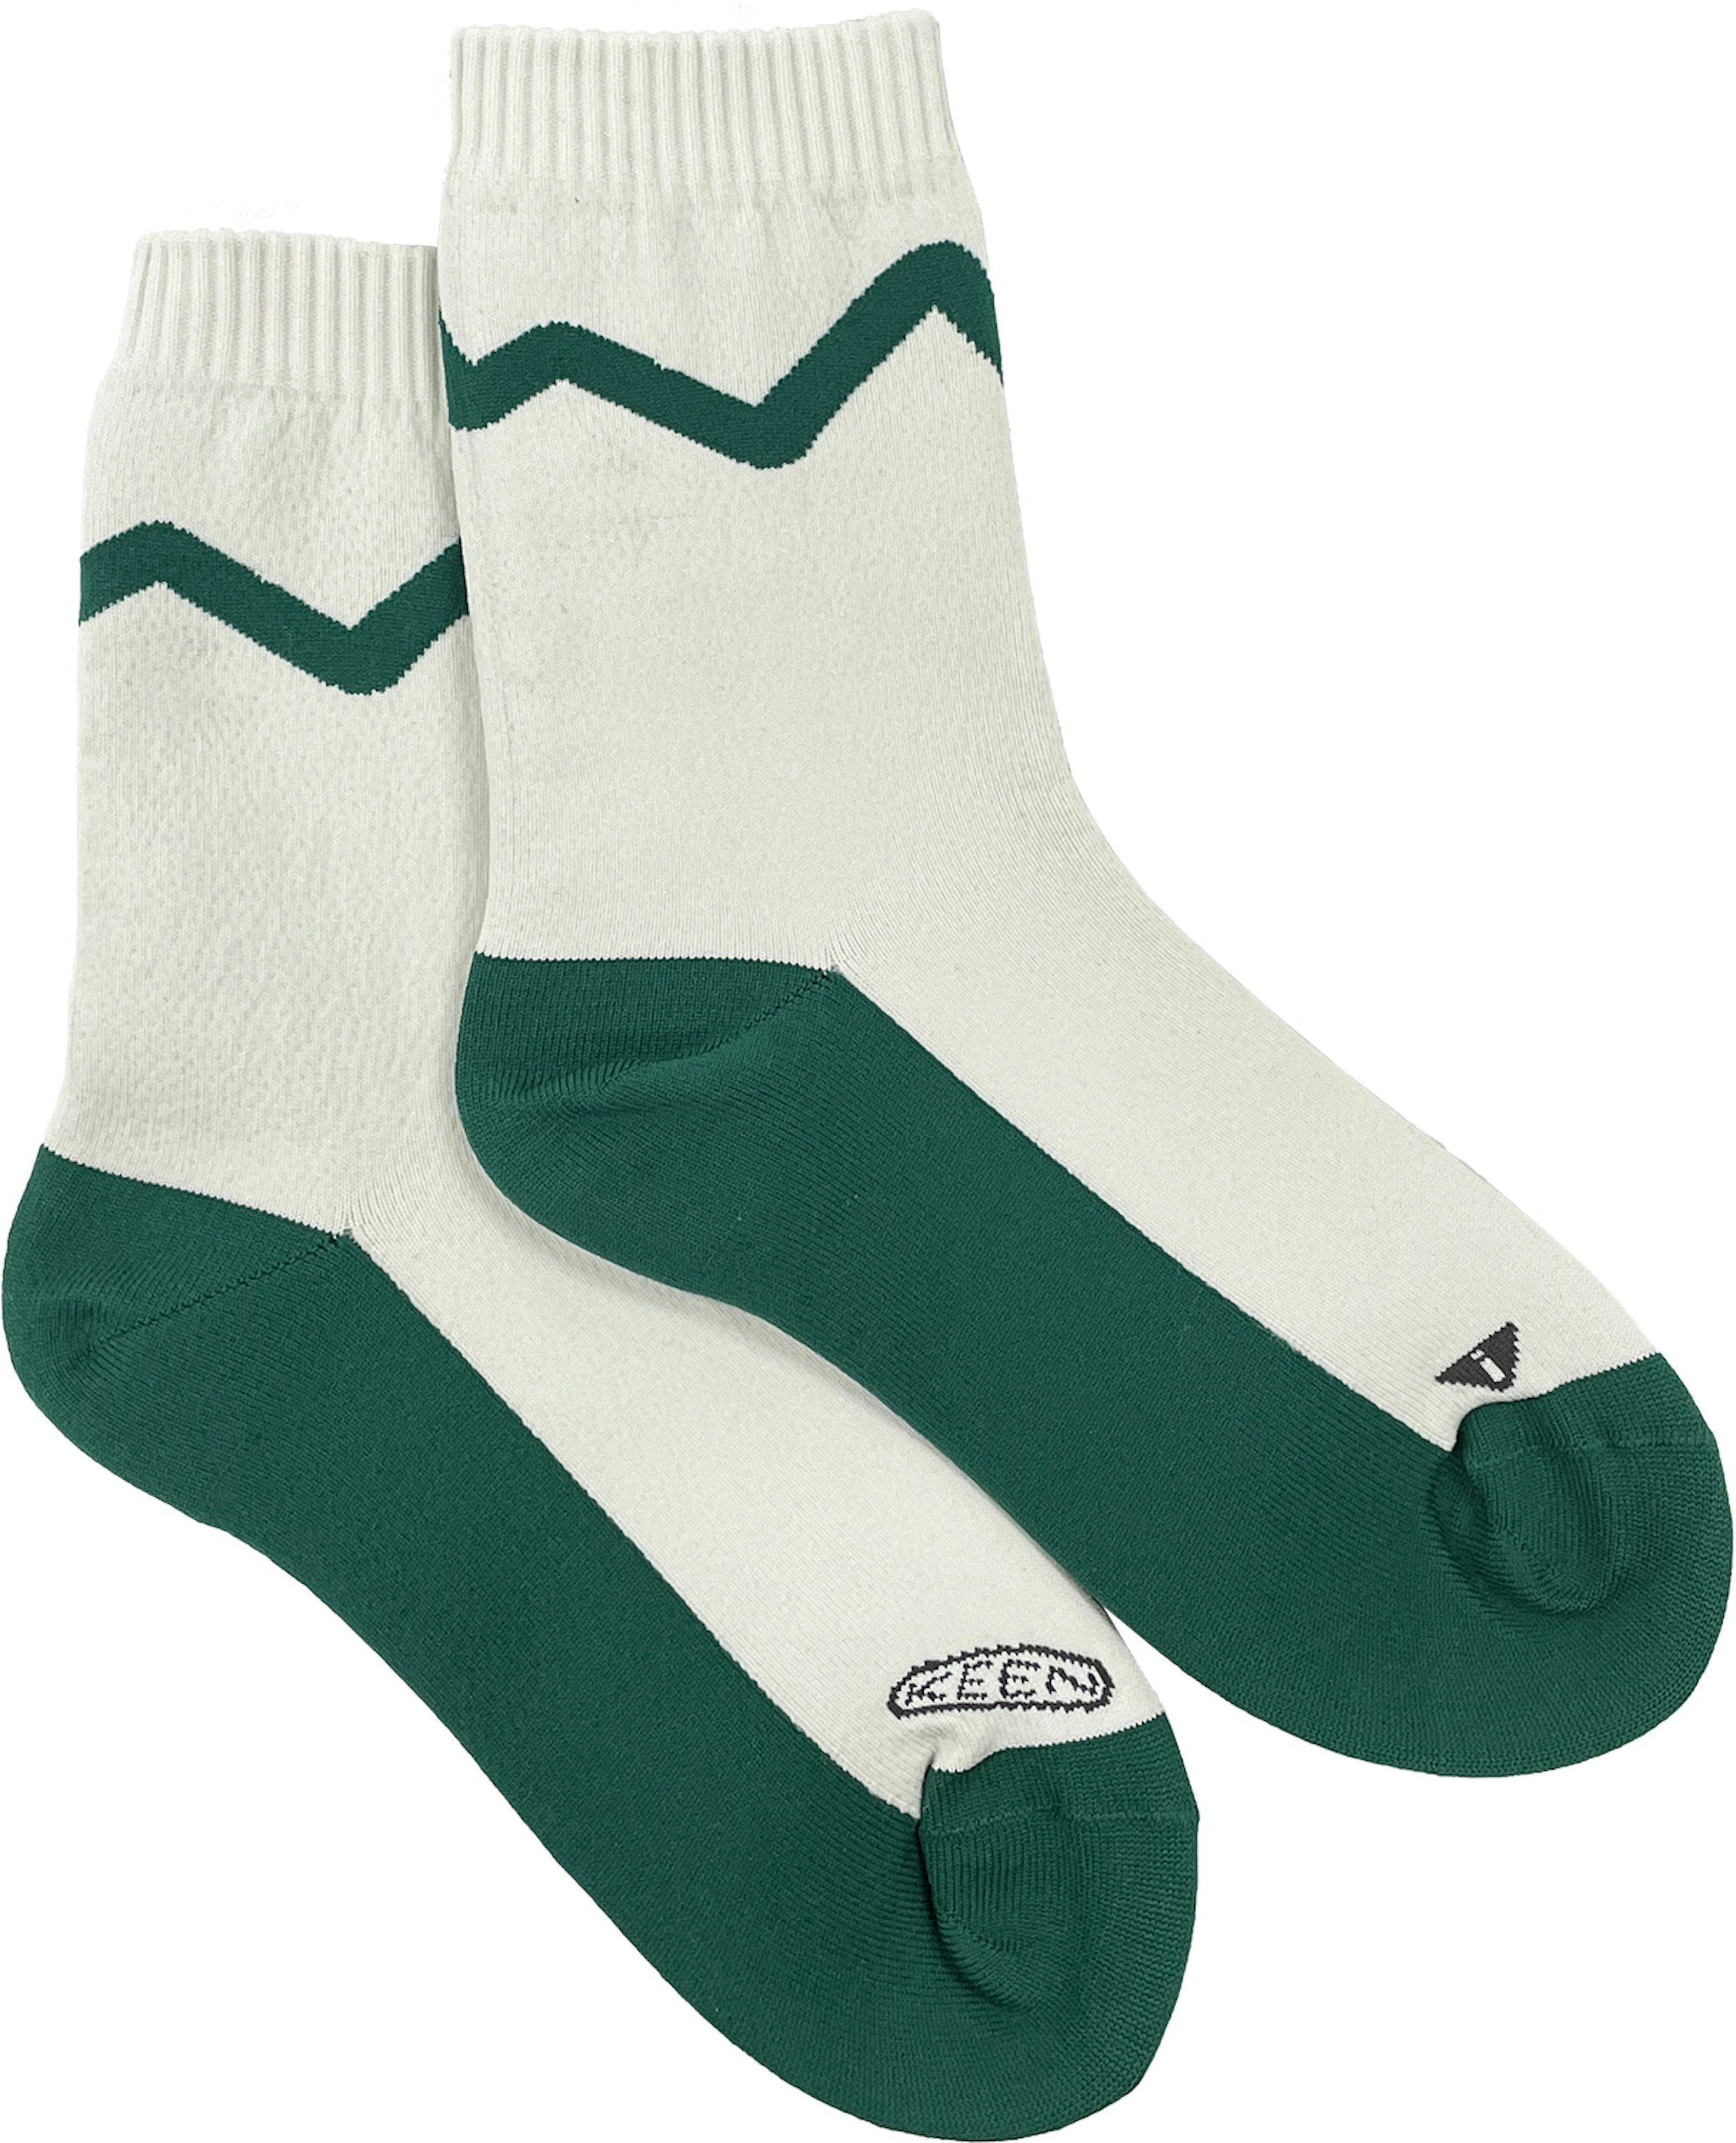 The green lines on the White socks embody the mountains around Portland during the spring and summer seasons